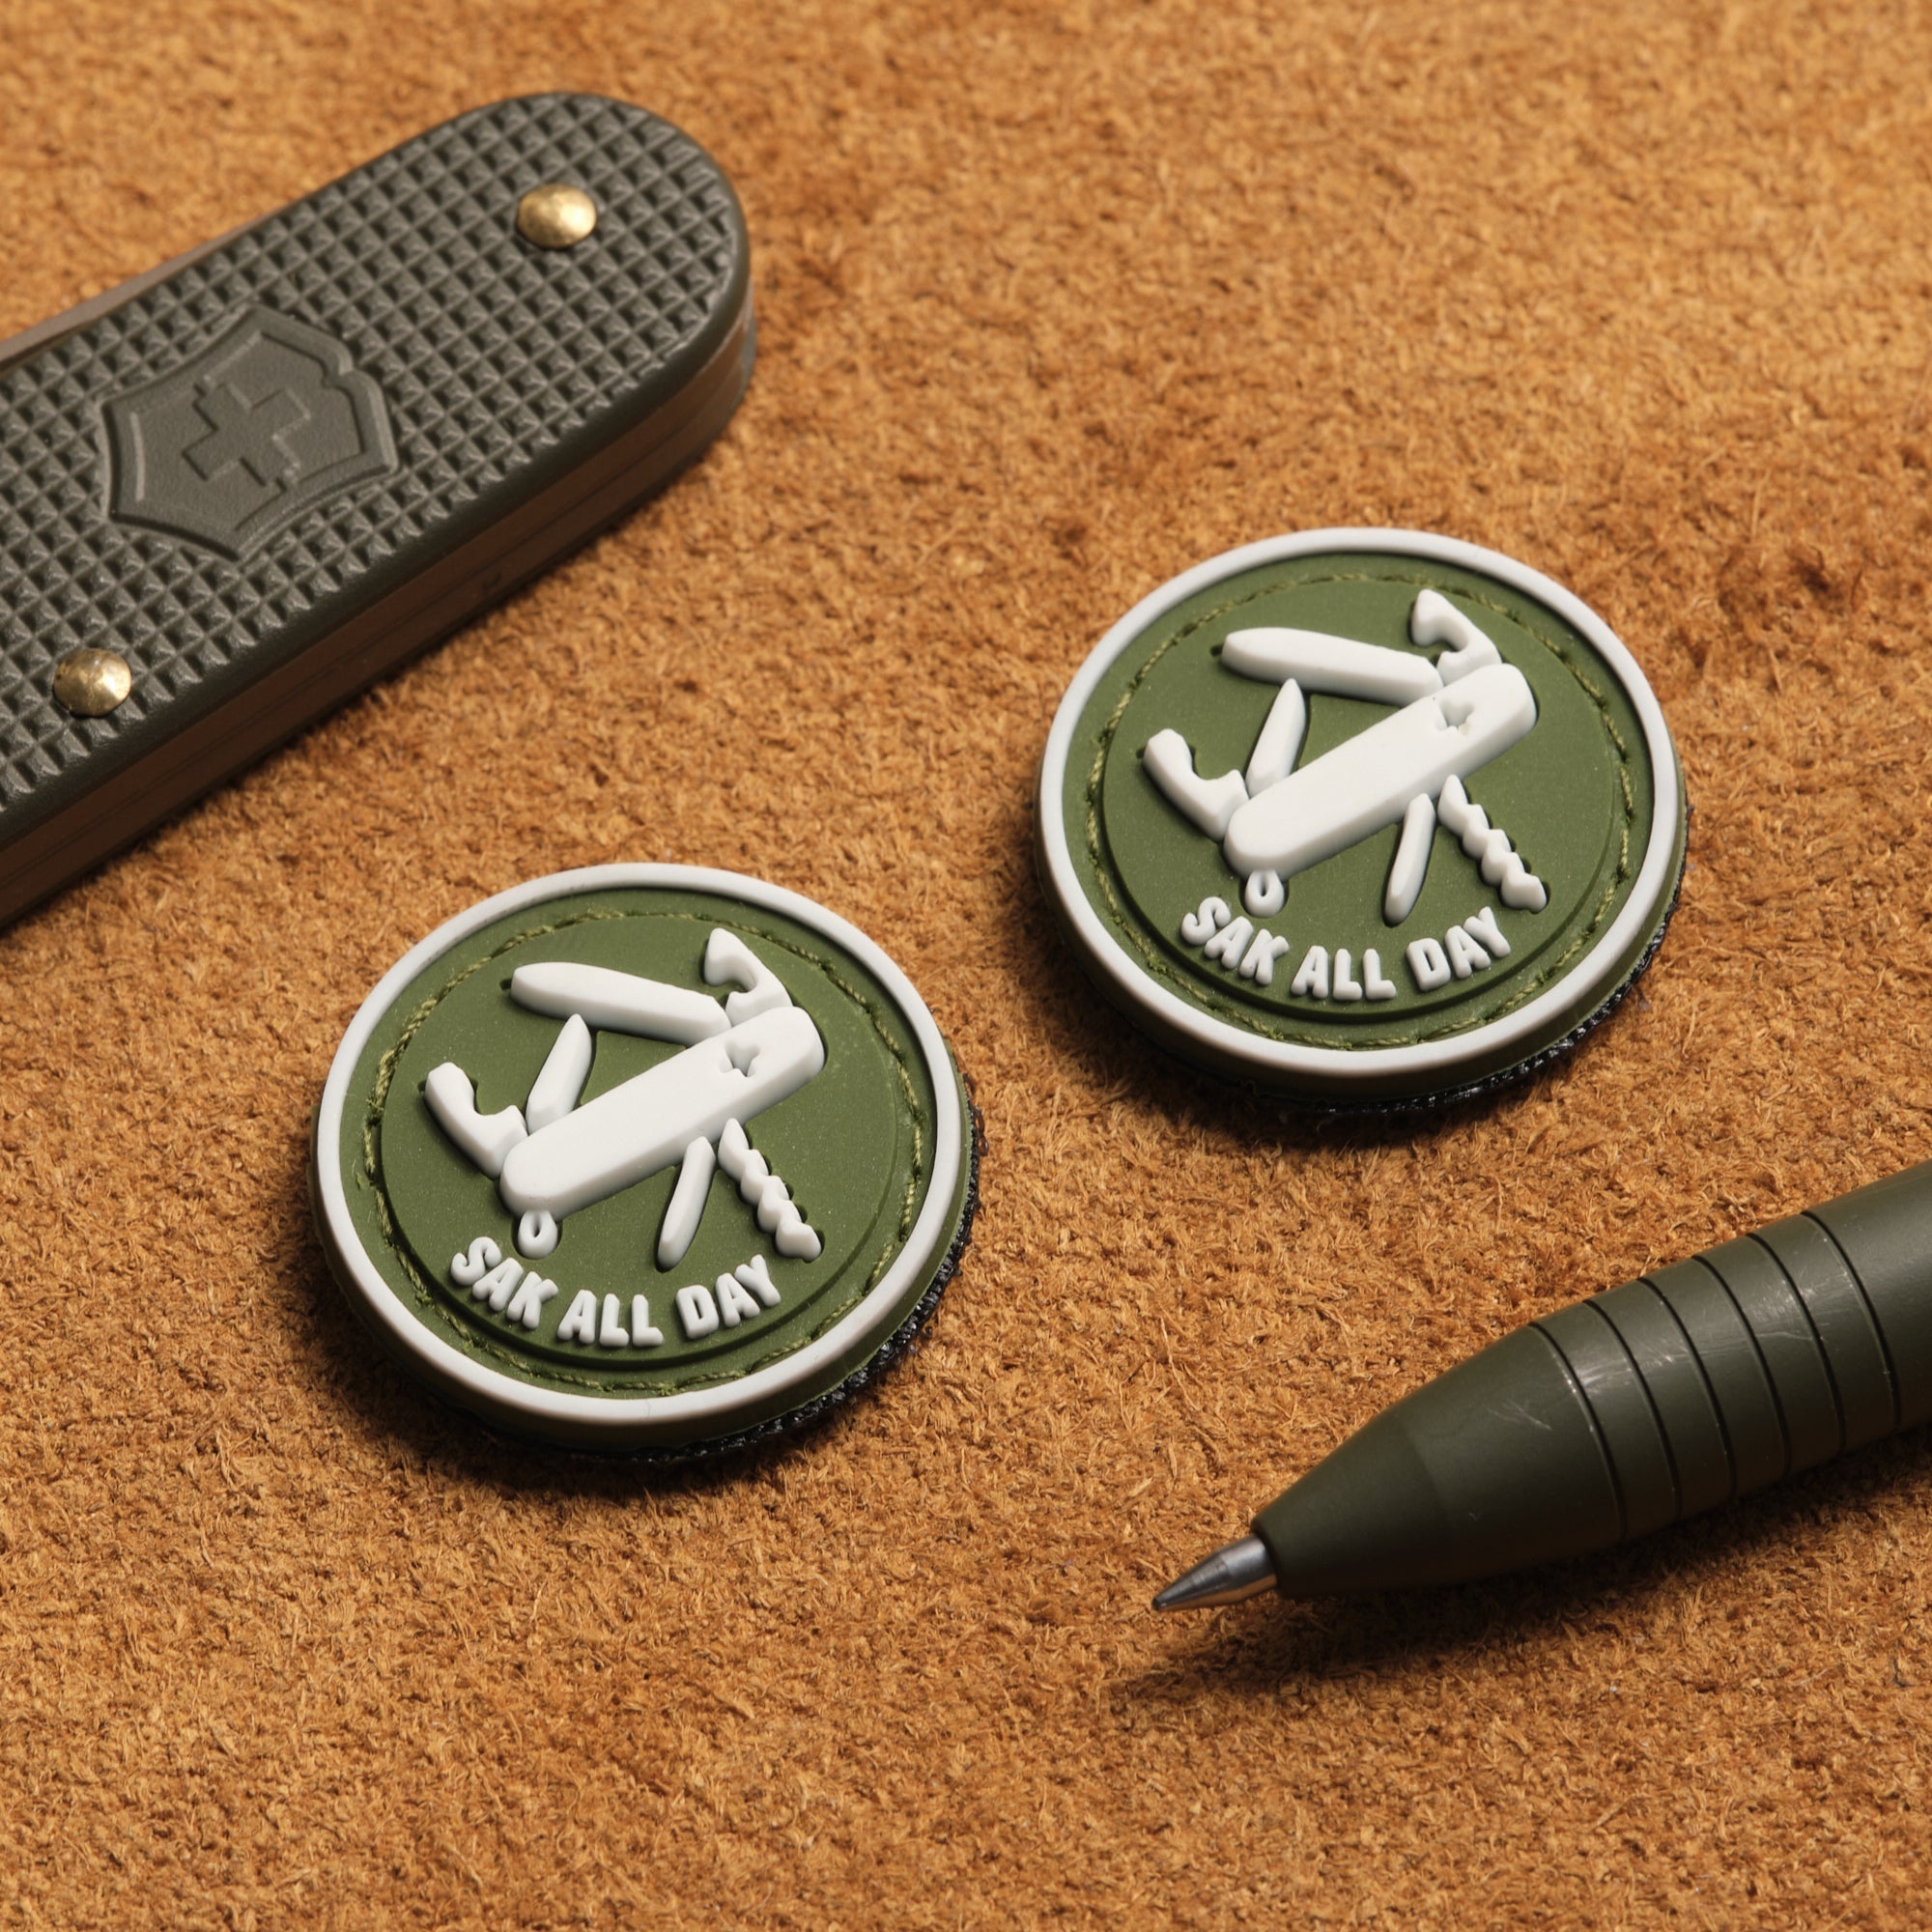 SAK ALL DAY RE PVC Patches - OD Green